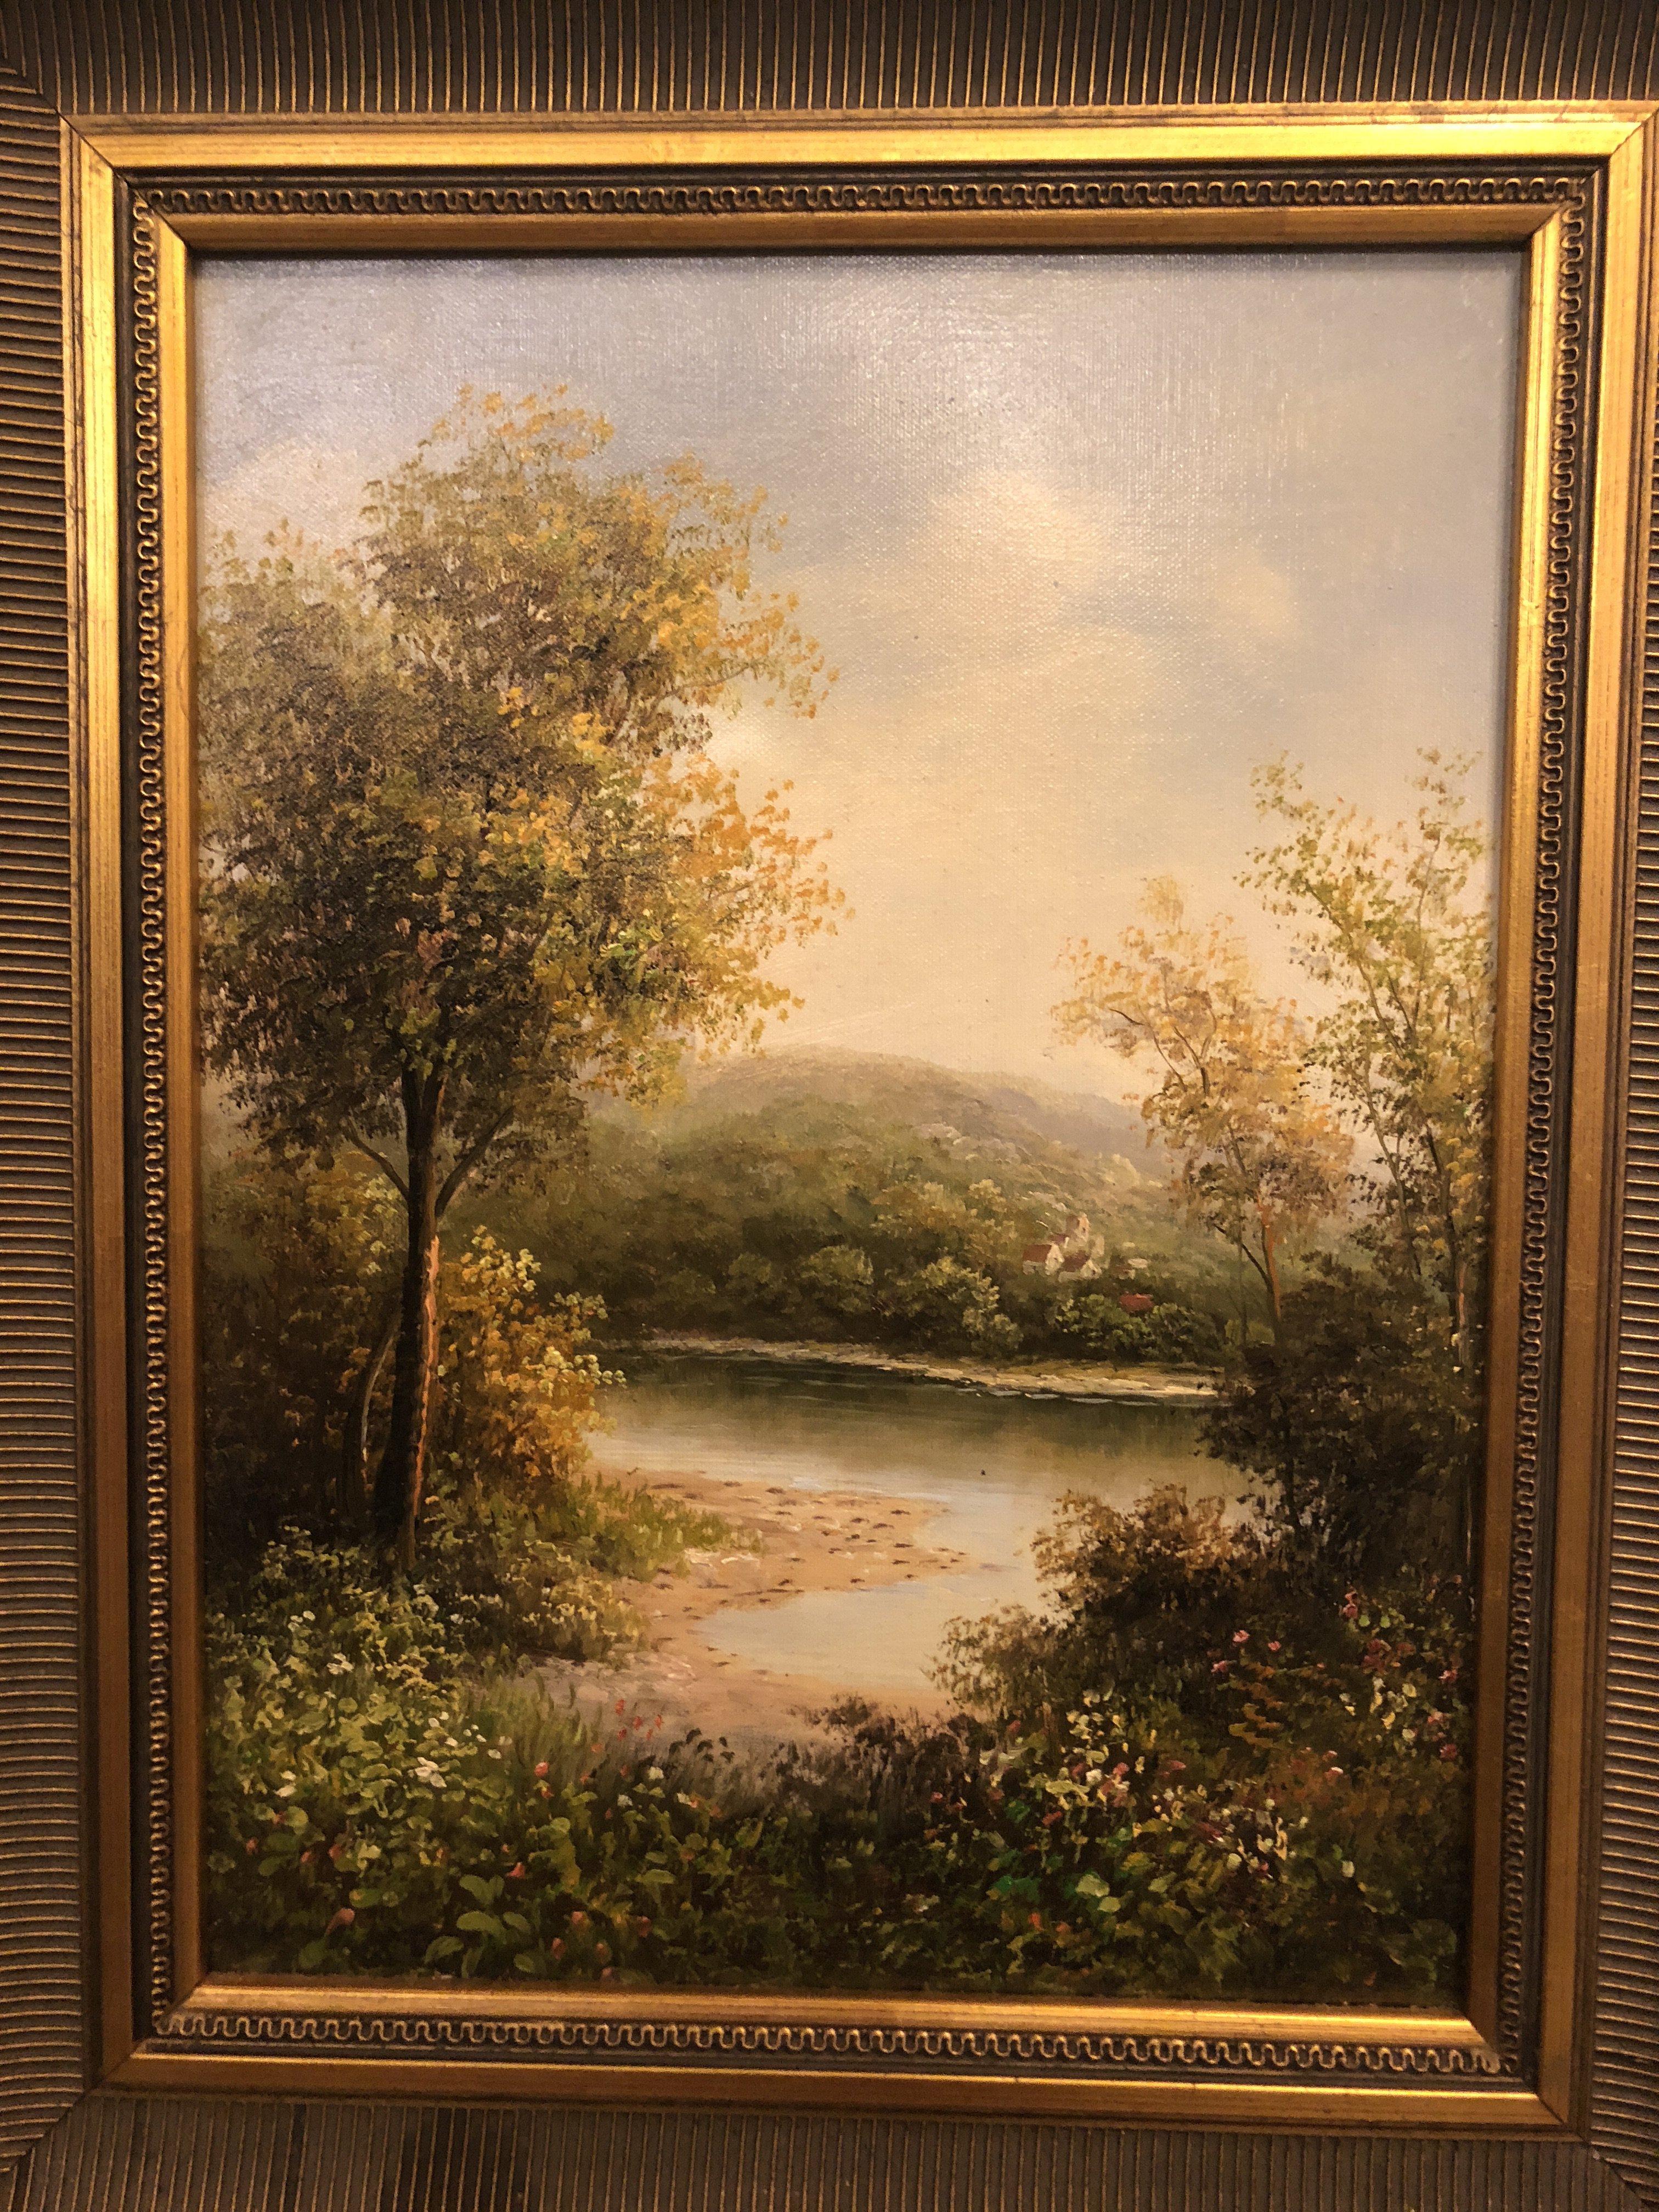 An exquisite oil on canvas landscape painting featuring a relaxing forest scene. The gilt frame is beautifully carved and adds elegance to the painting. 
A classical and artsy addition to your wall decoration.